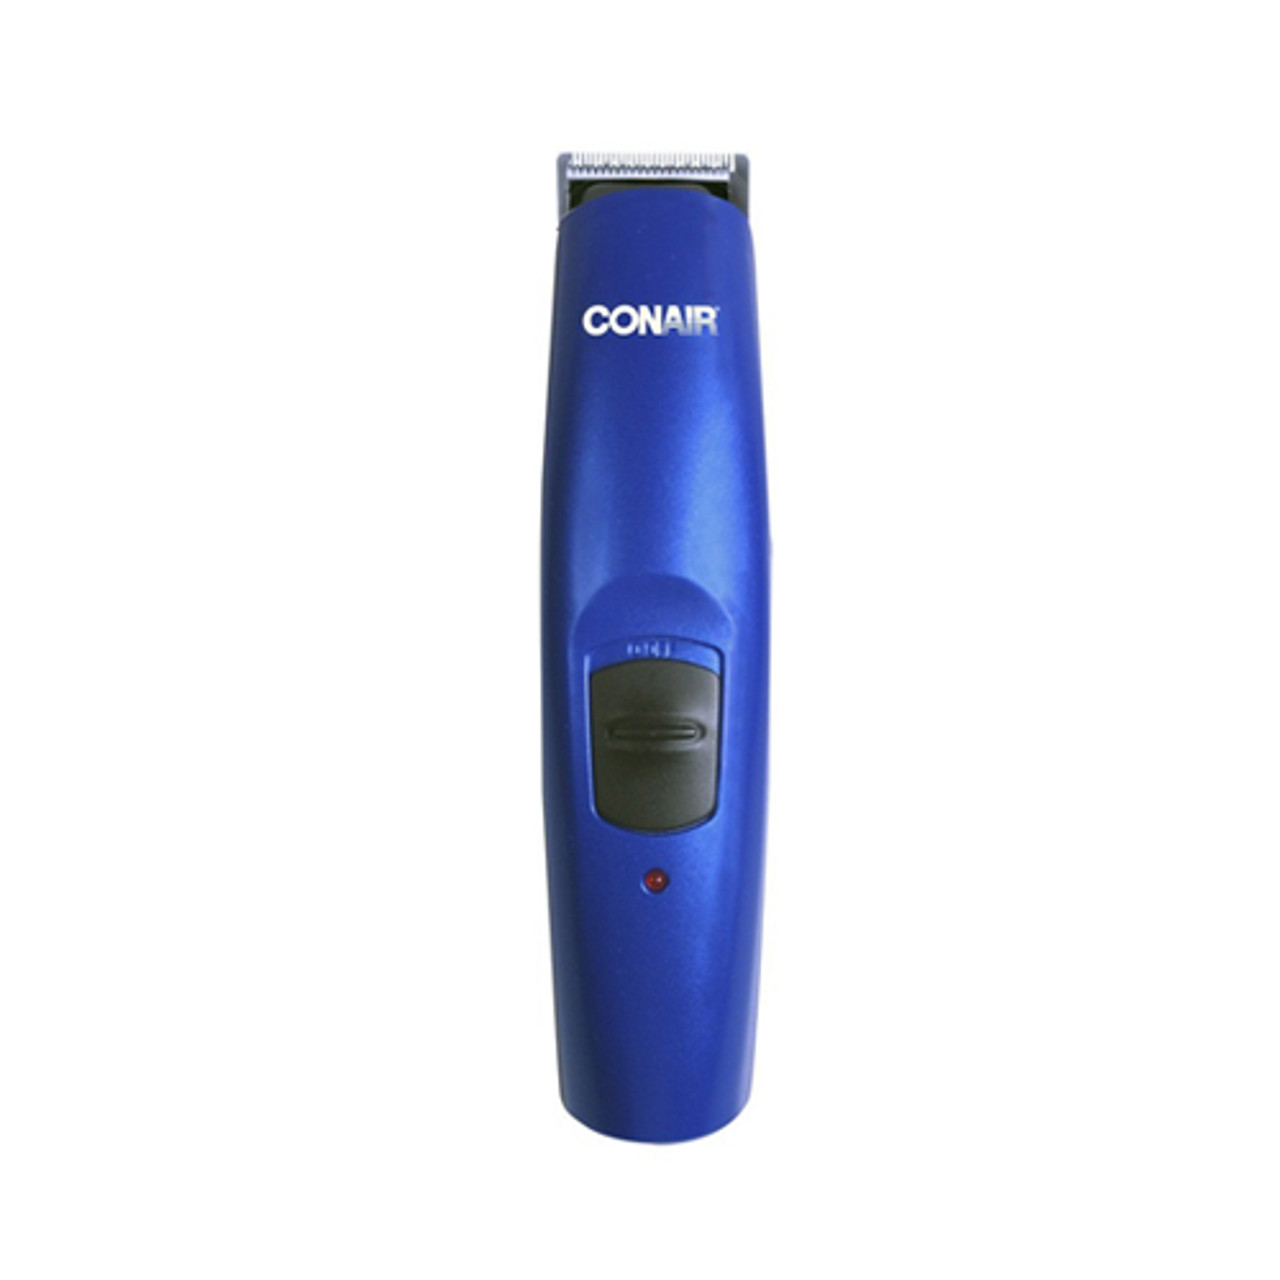 Conair Battery-Operated 2 in 1 Beard and Mustache Trimmer